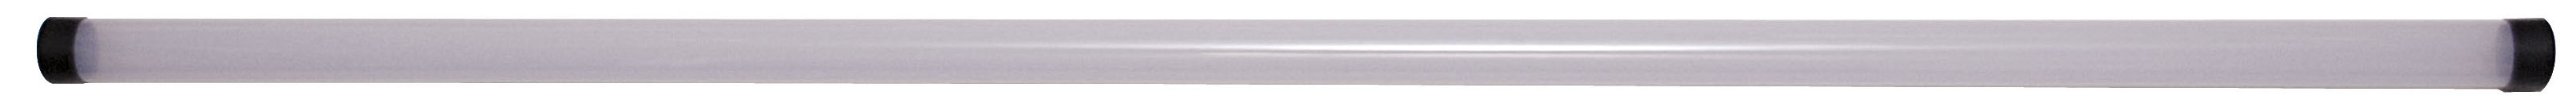 Browning Transport Match Pole Tube - Multicoloured, 2.05 m x 6.0 cm